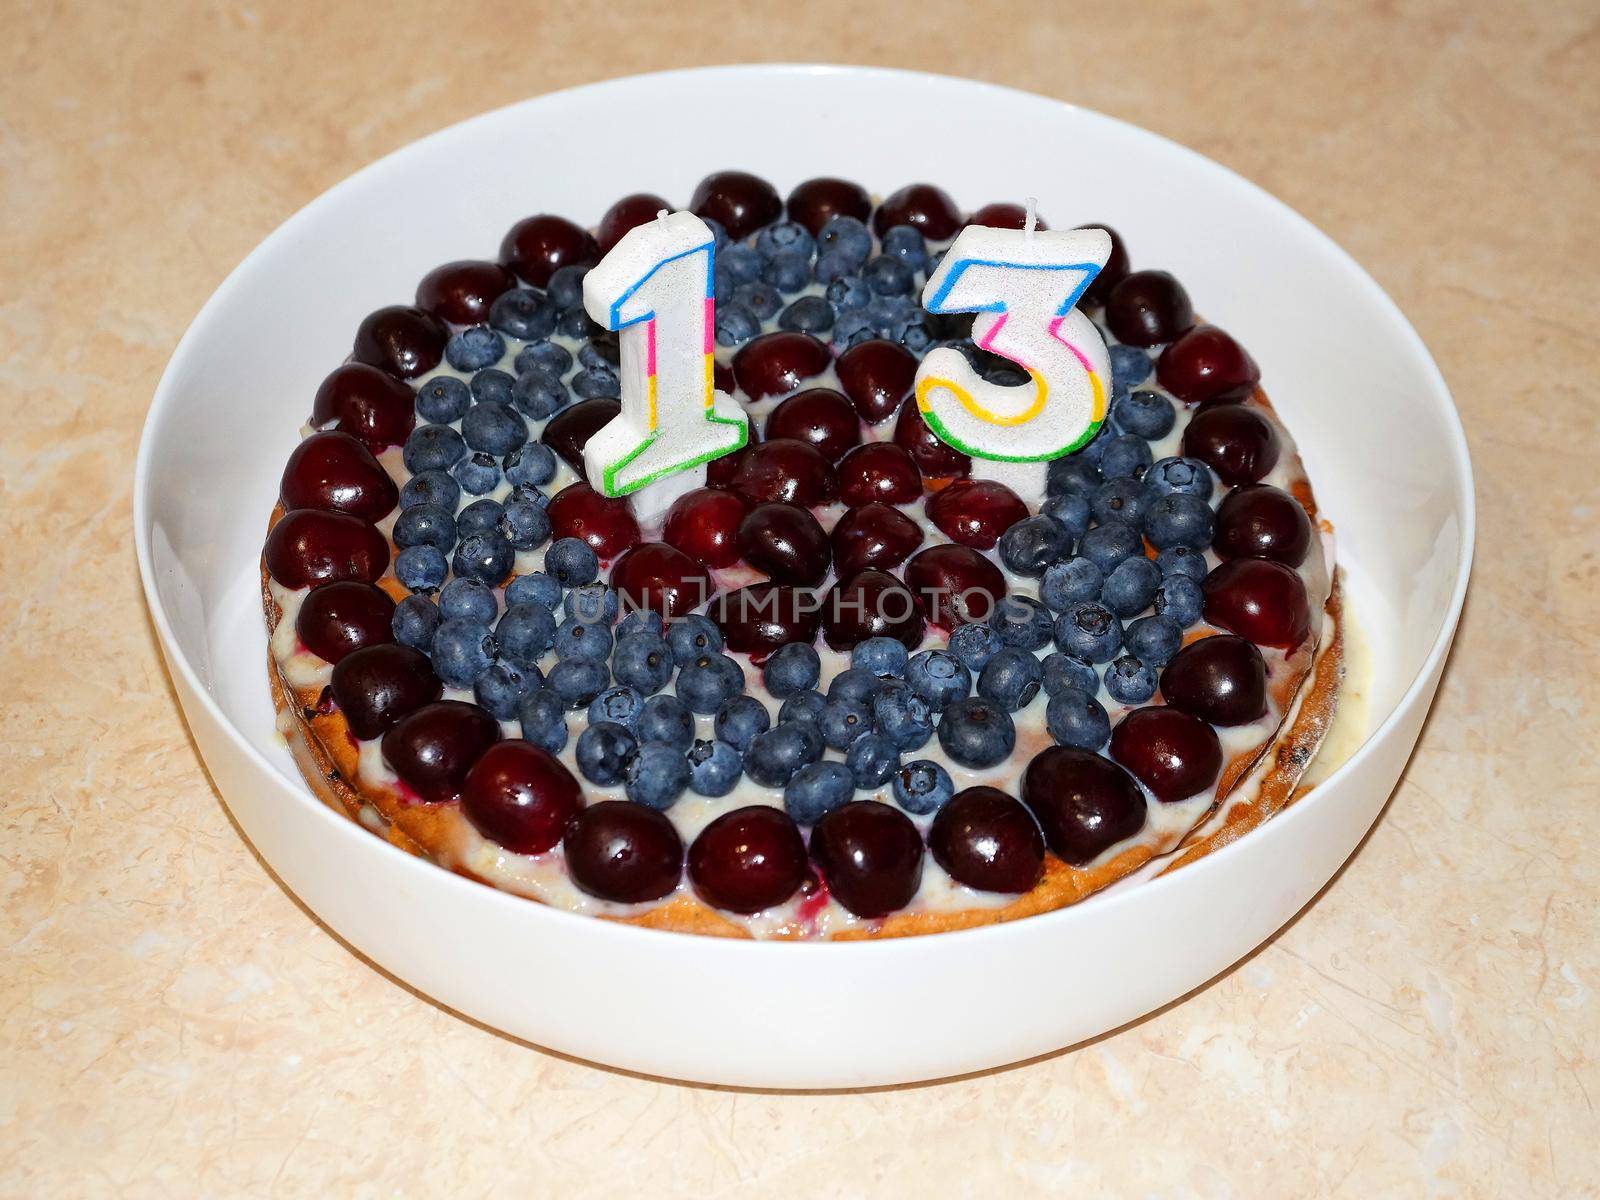 candles with number 13 on cherry cake, thirteenth birthday by Annado